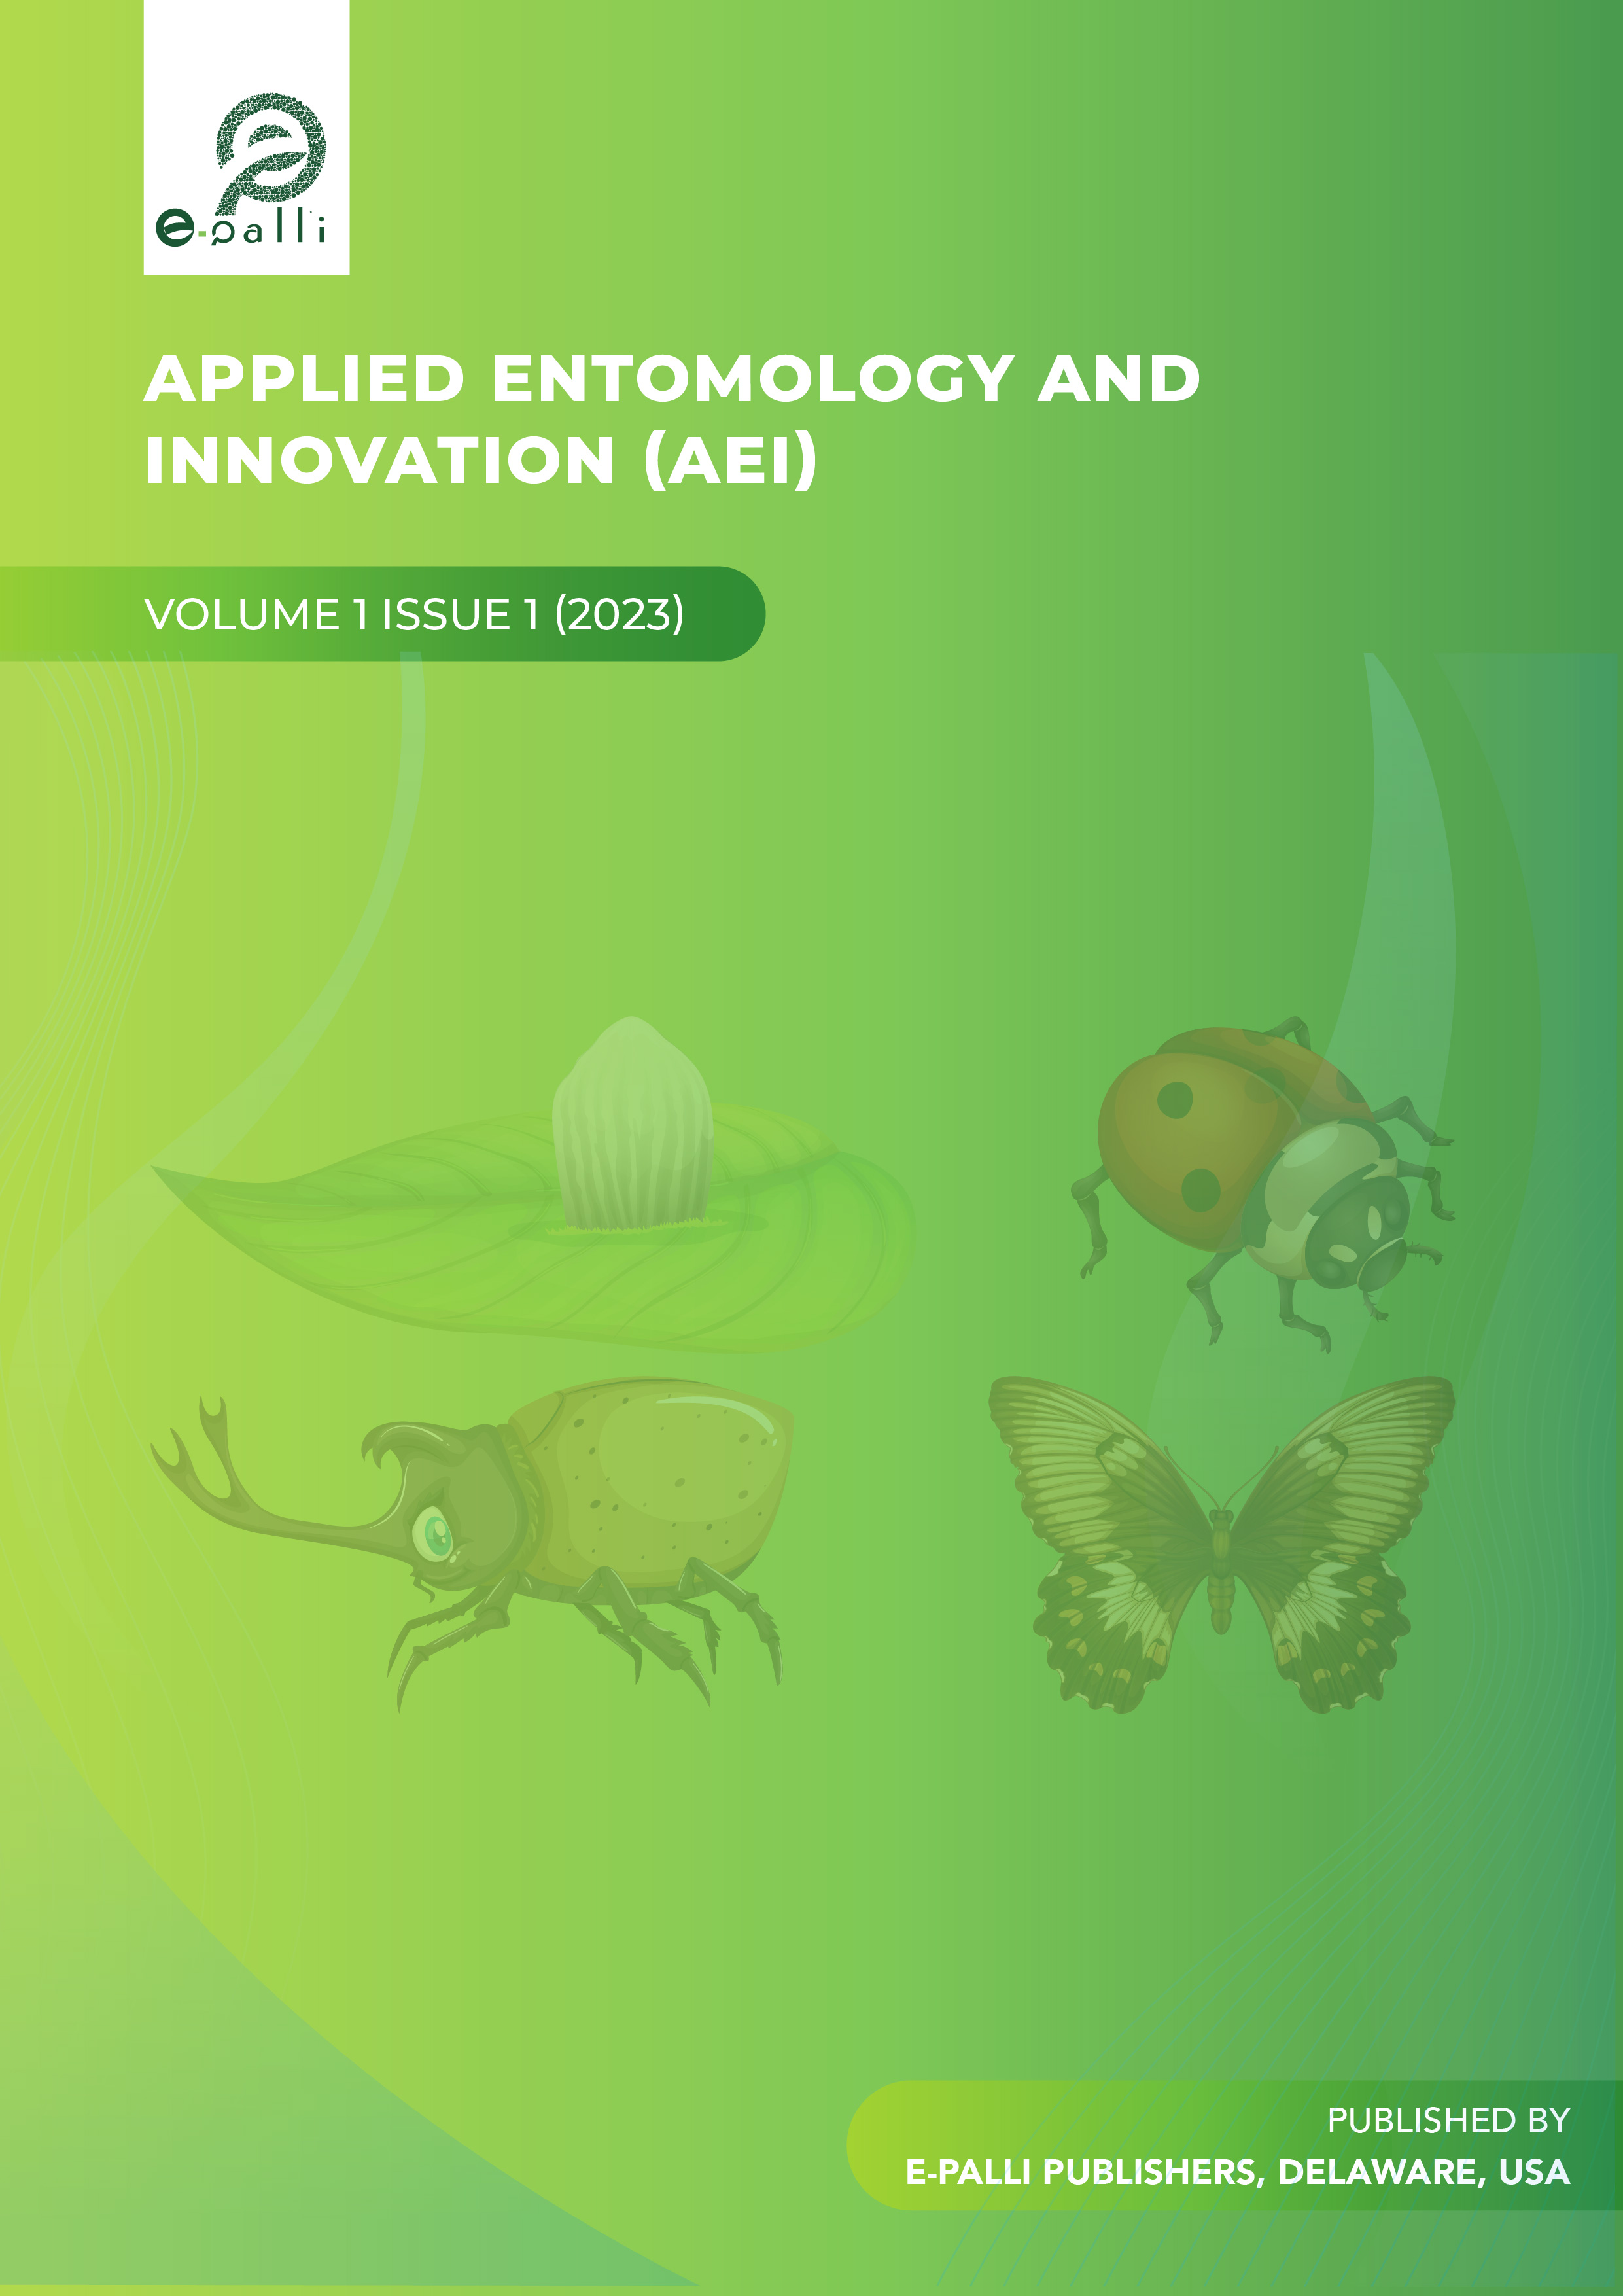 					View Vol. 1 No. 1 (2023): Applied Entomology and Innovation
				